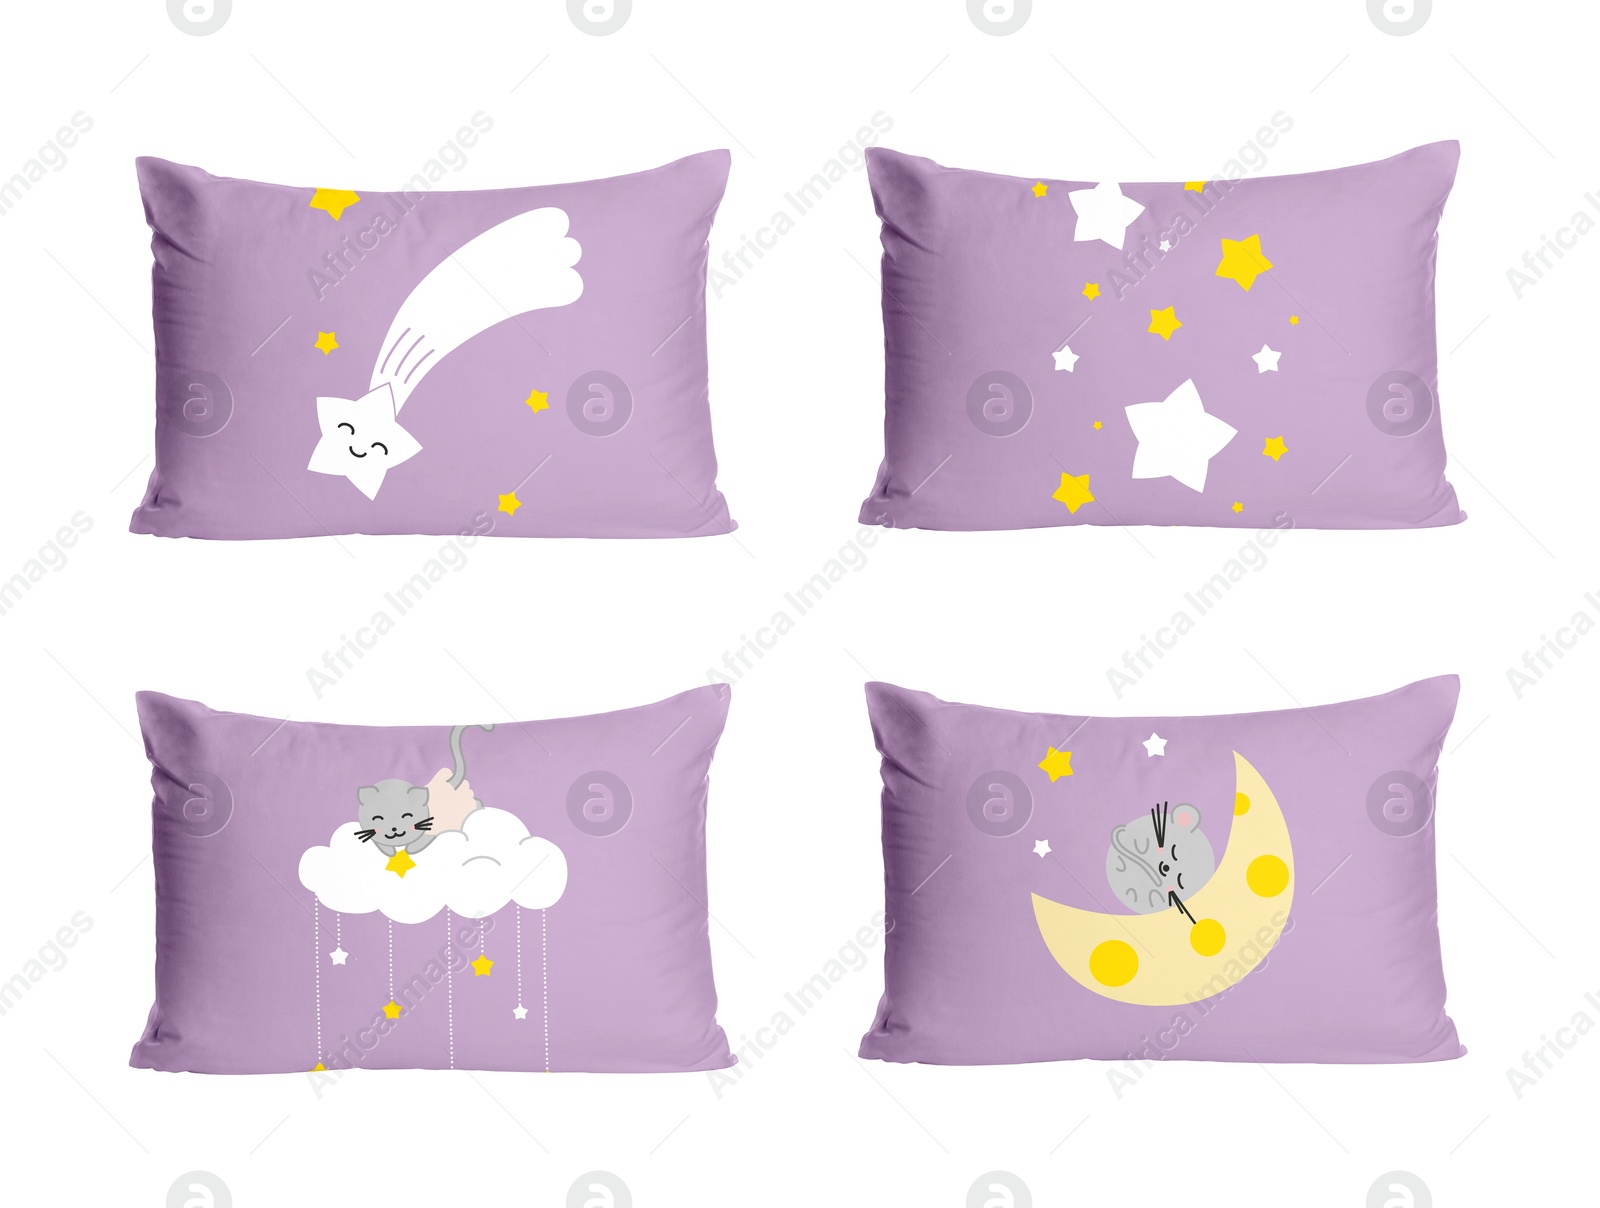 Image of Soft pillows with cute prints isolated on white, set